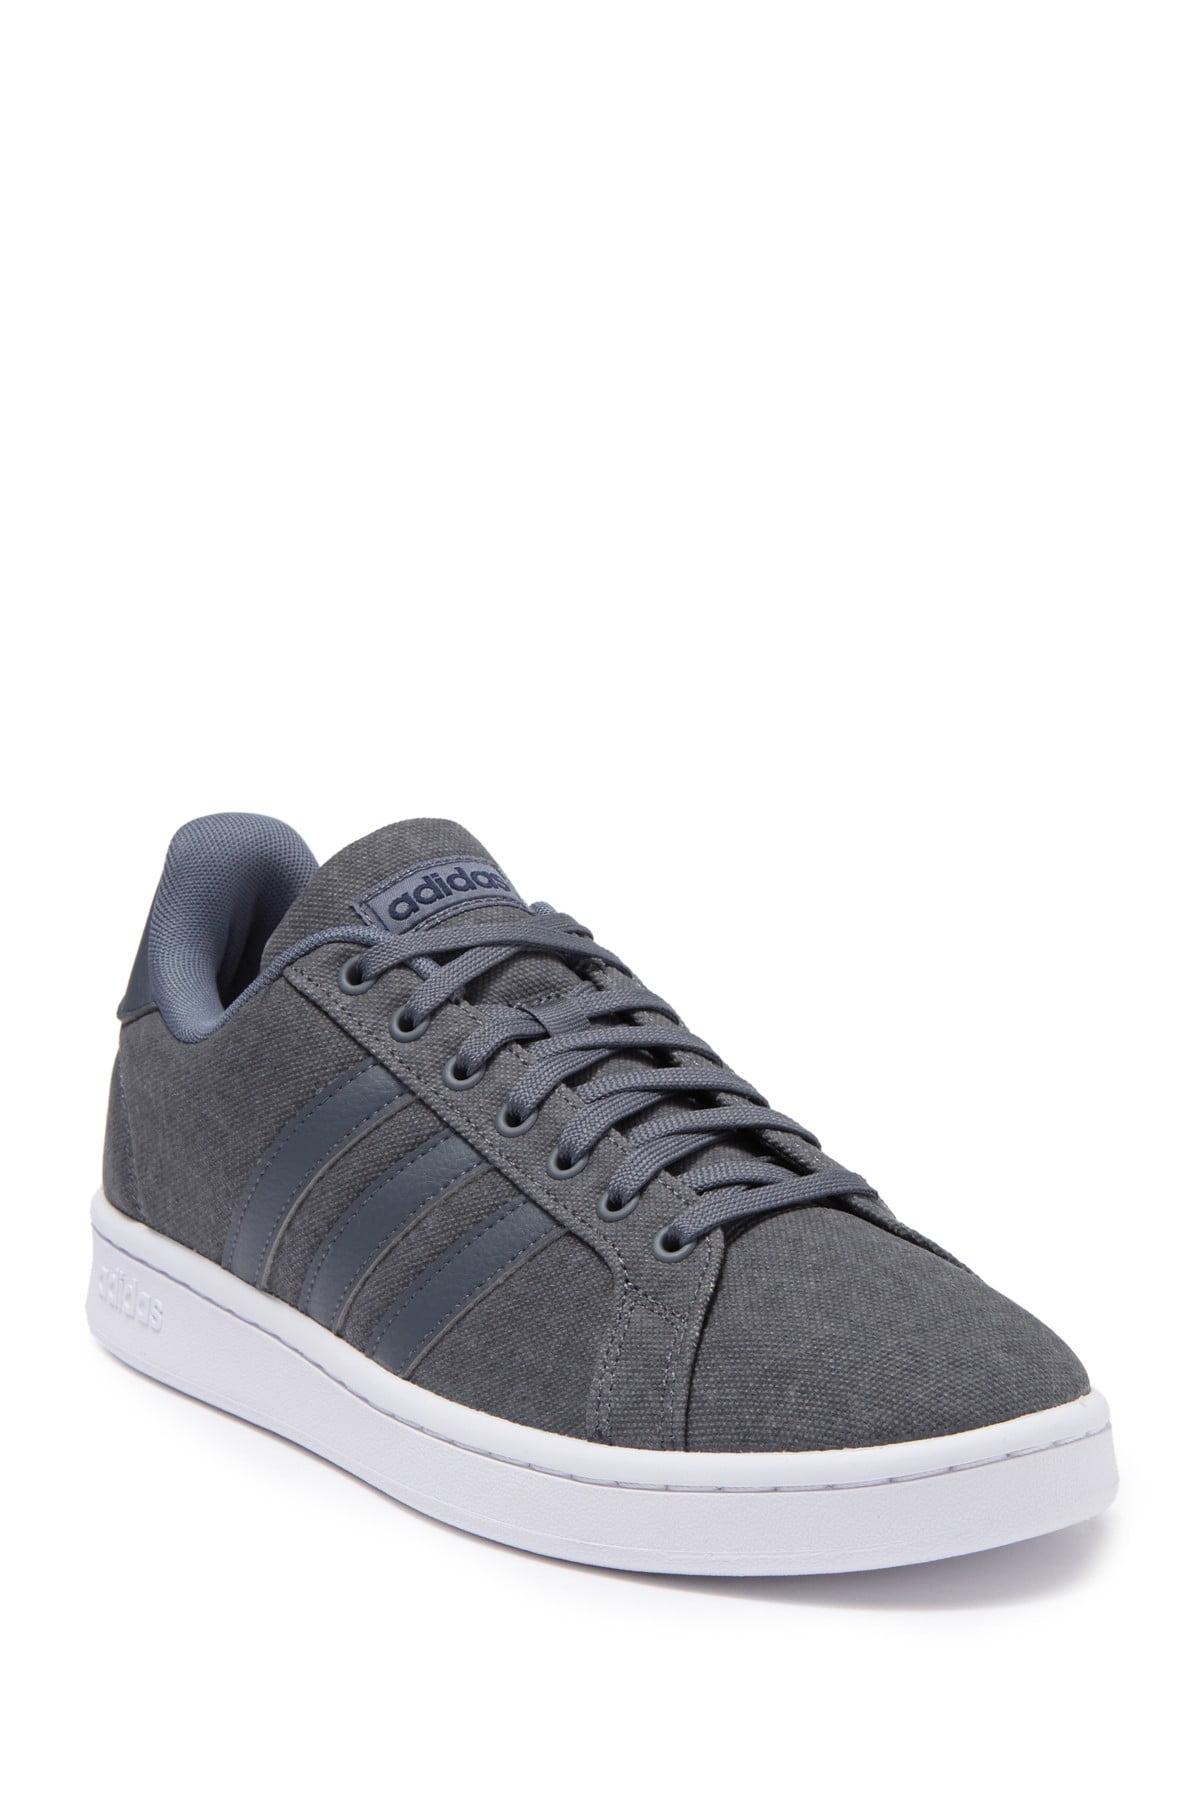 adidas Suede Grand Court Sneaker, Onix/legend Ink, 6.5 M Us - Save 40% |  Lyst